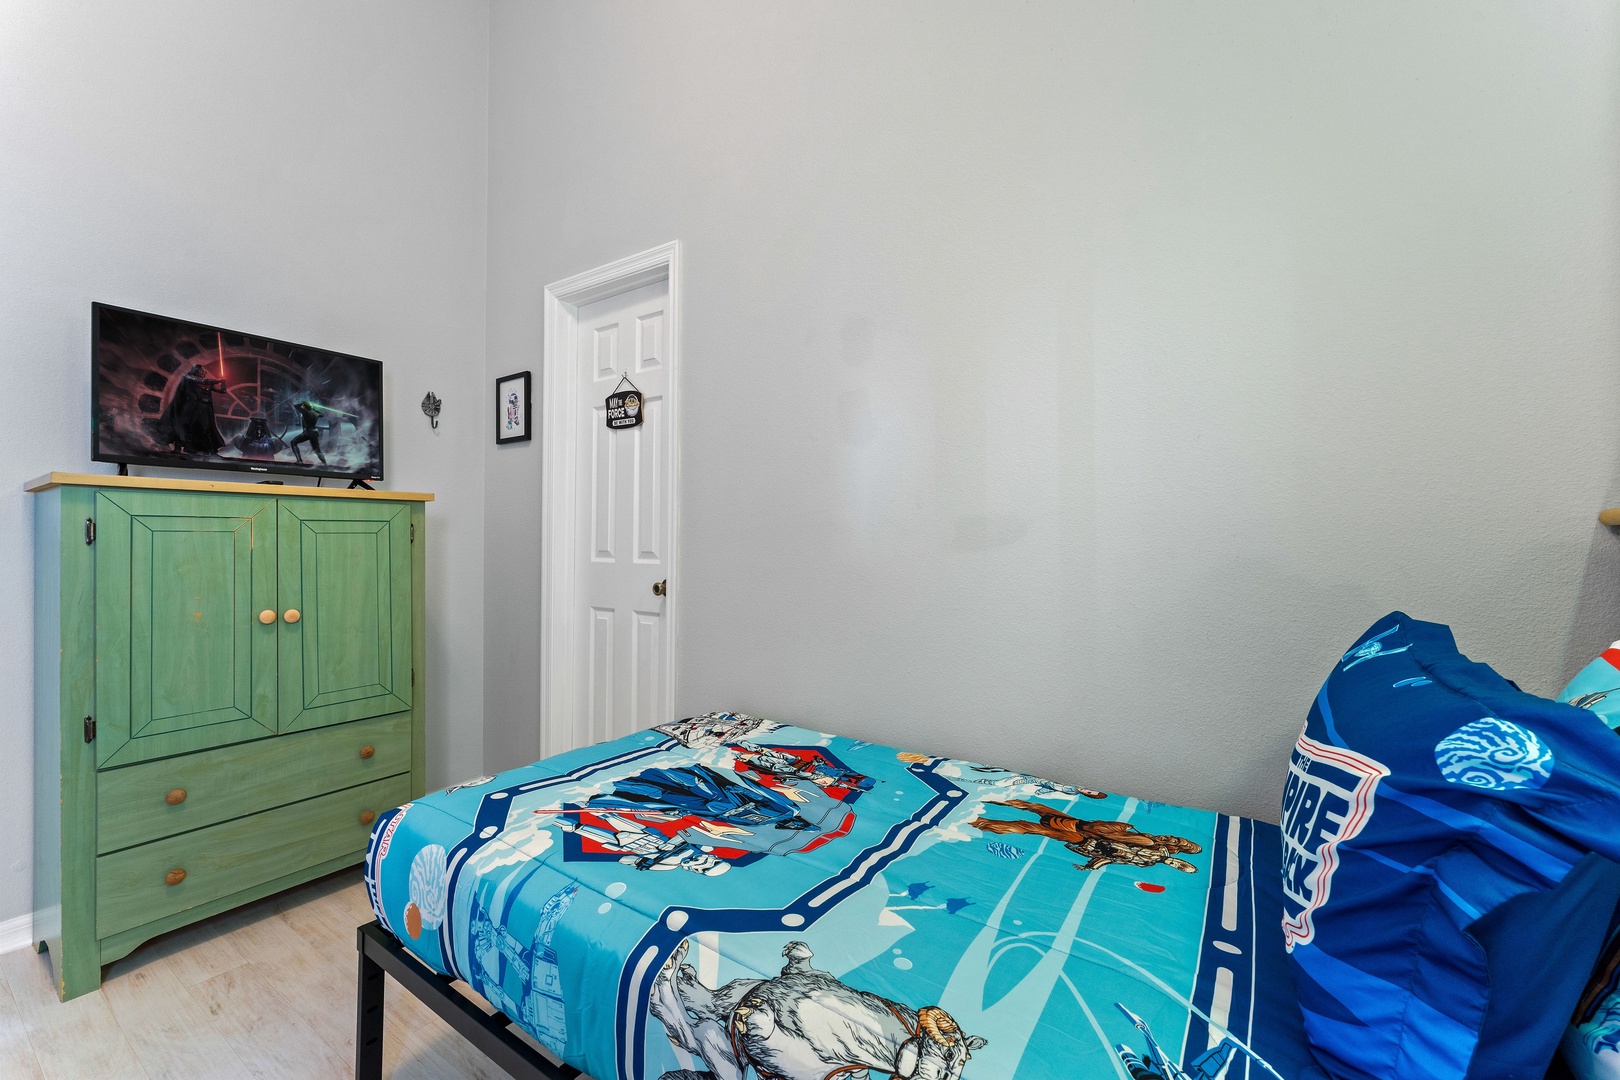 Galactic dreams await in this bedroom, offering two twin beds & a Smart TV